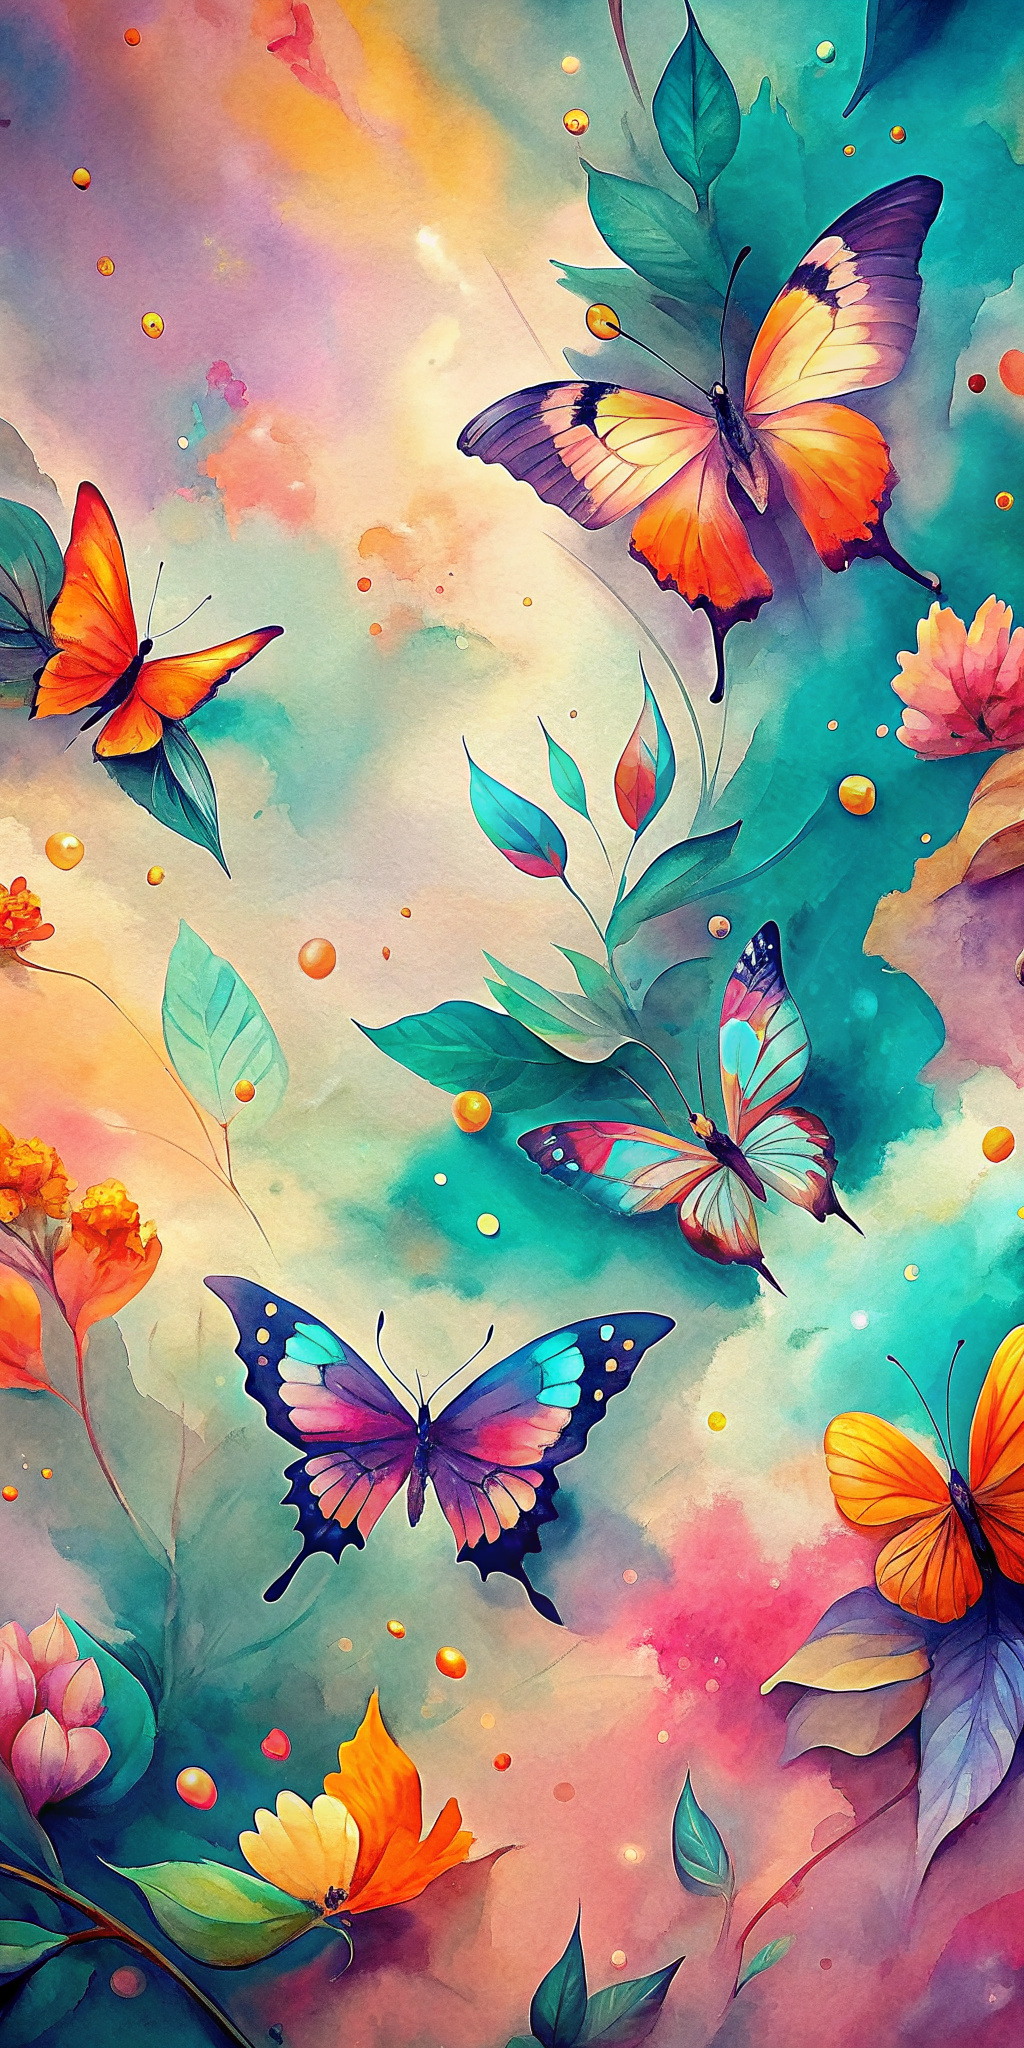 create phone wallpaper with butterflies in natural colors
